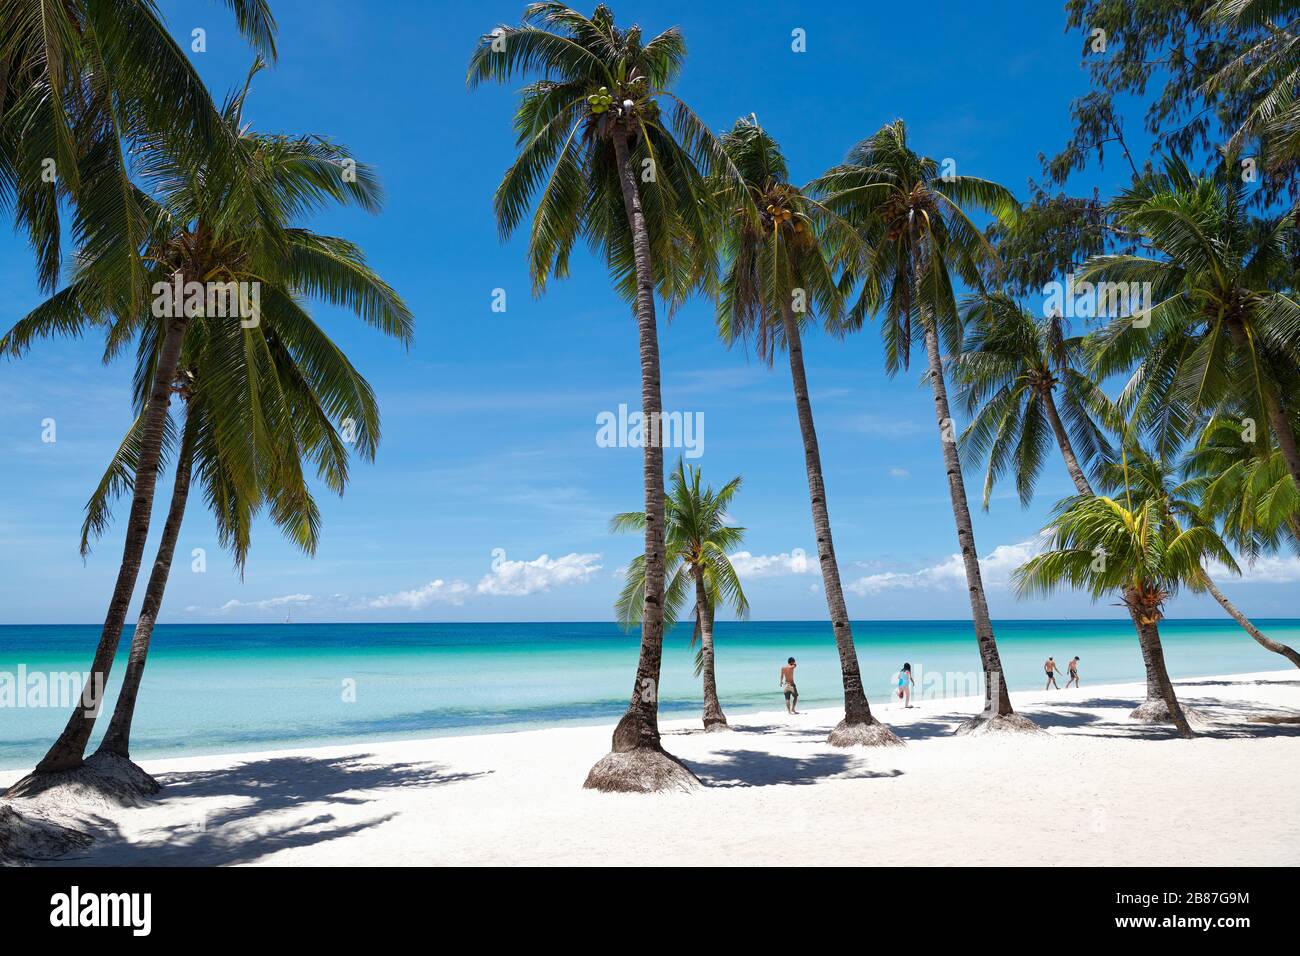 Boracay Island, Aklan Province, Philippines: People walking along the famous almost empty White Beach with coconut trees lined up Stock Photo